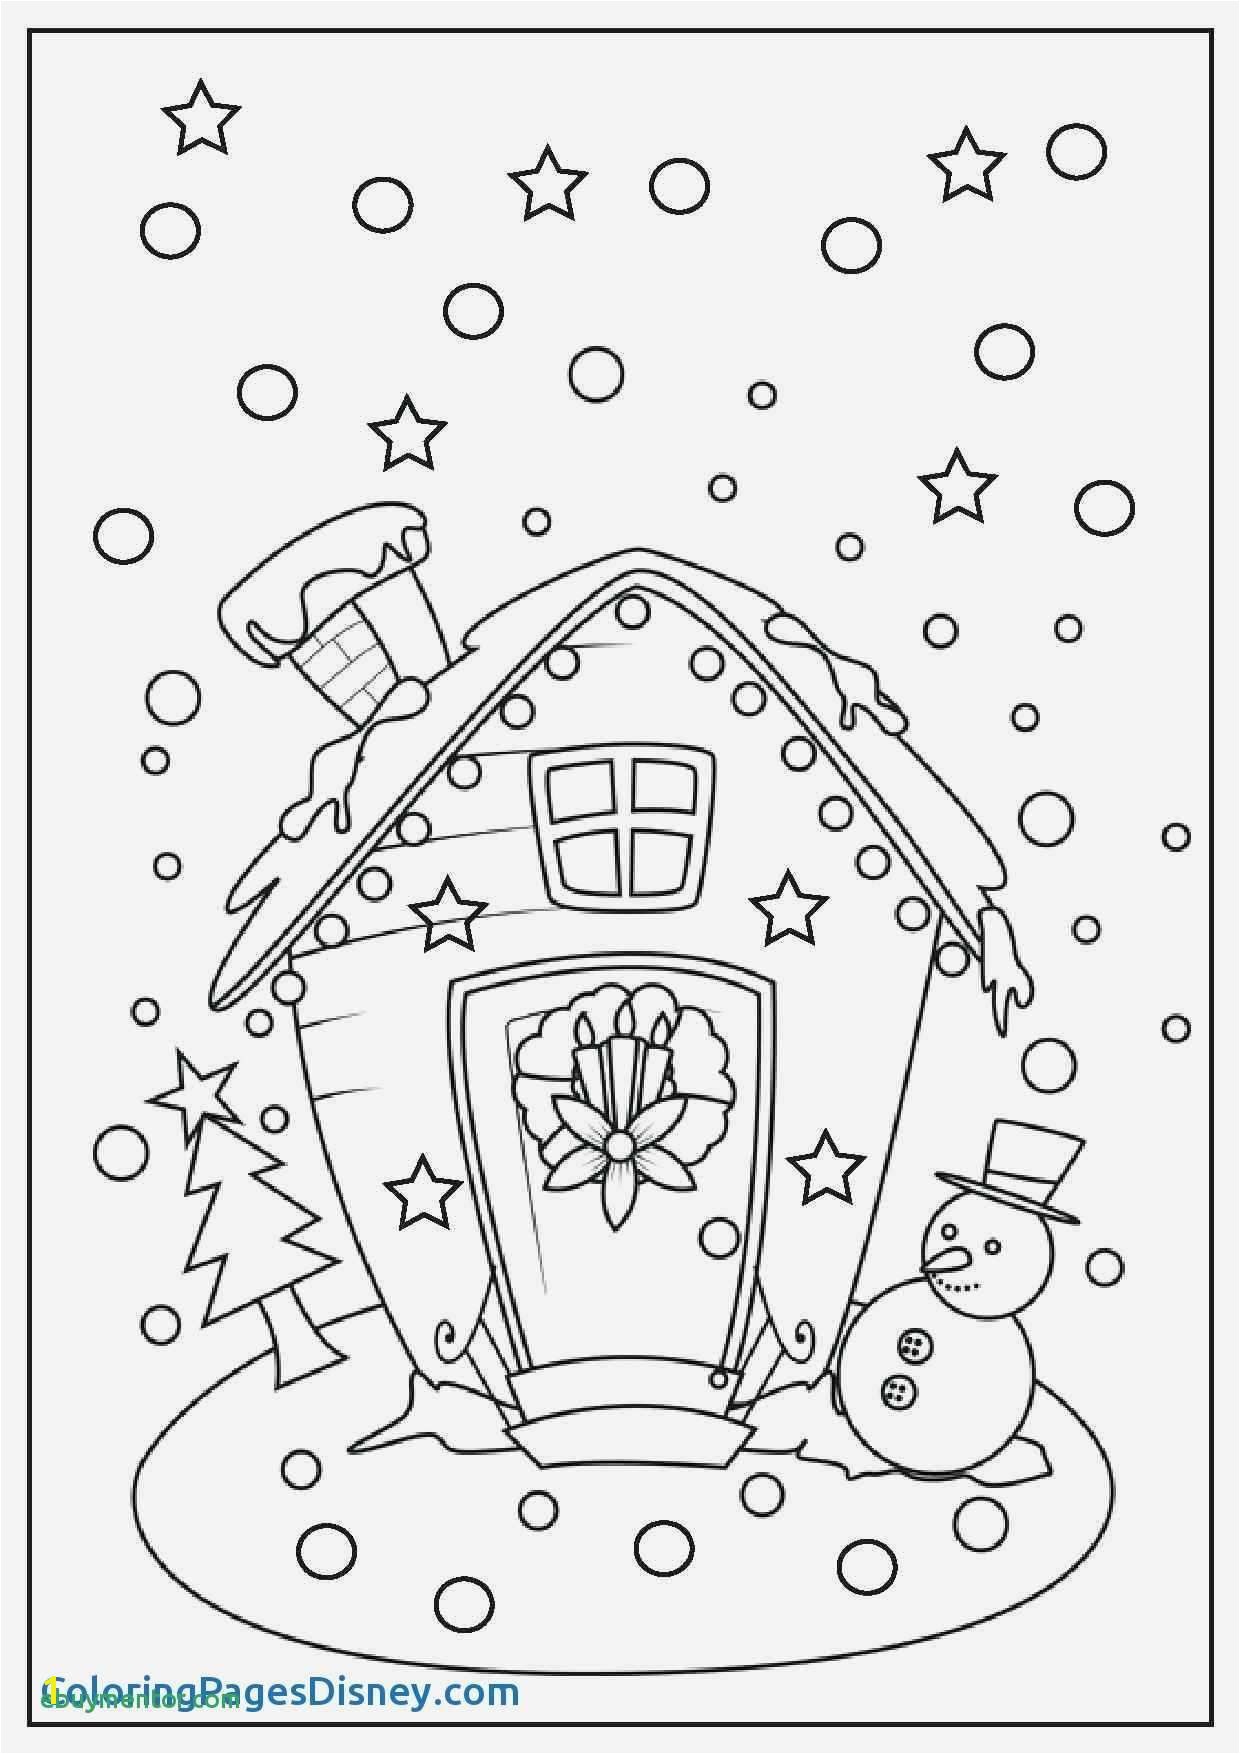 Christmas Coloring Pages Ks2 Free Printables Christmas Coloring Pages Cool Coloring Printables 0d